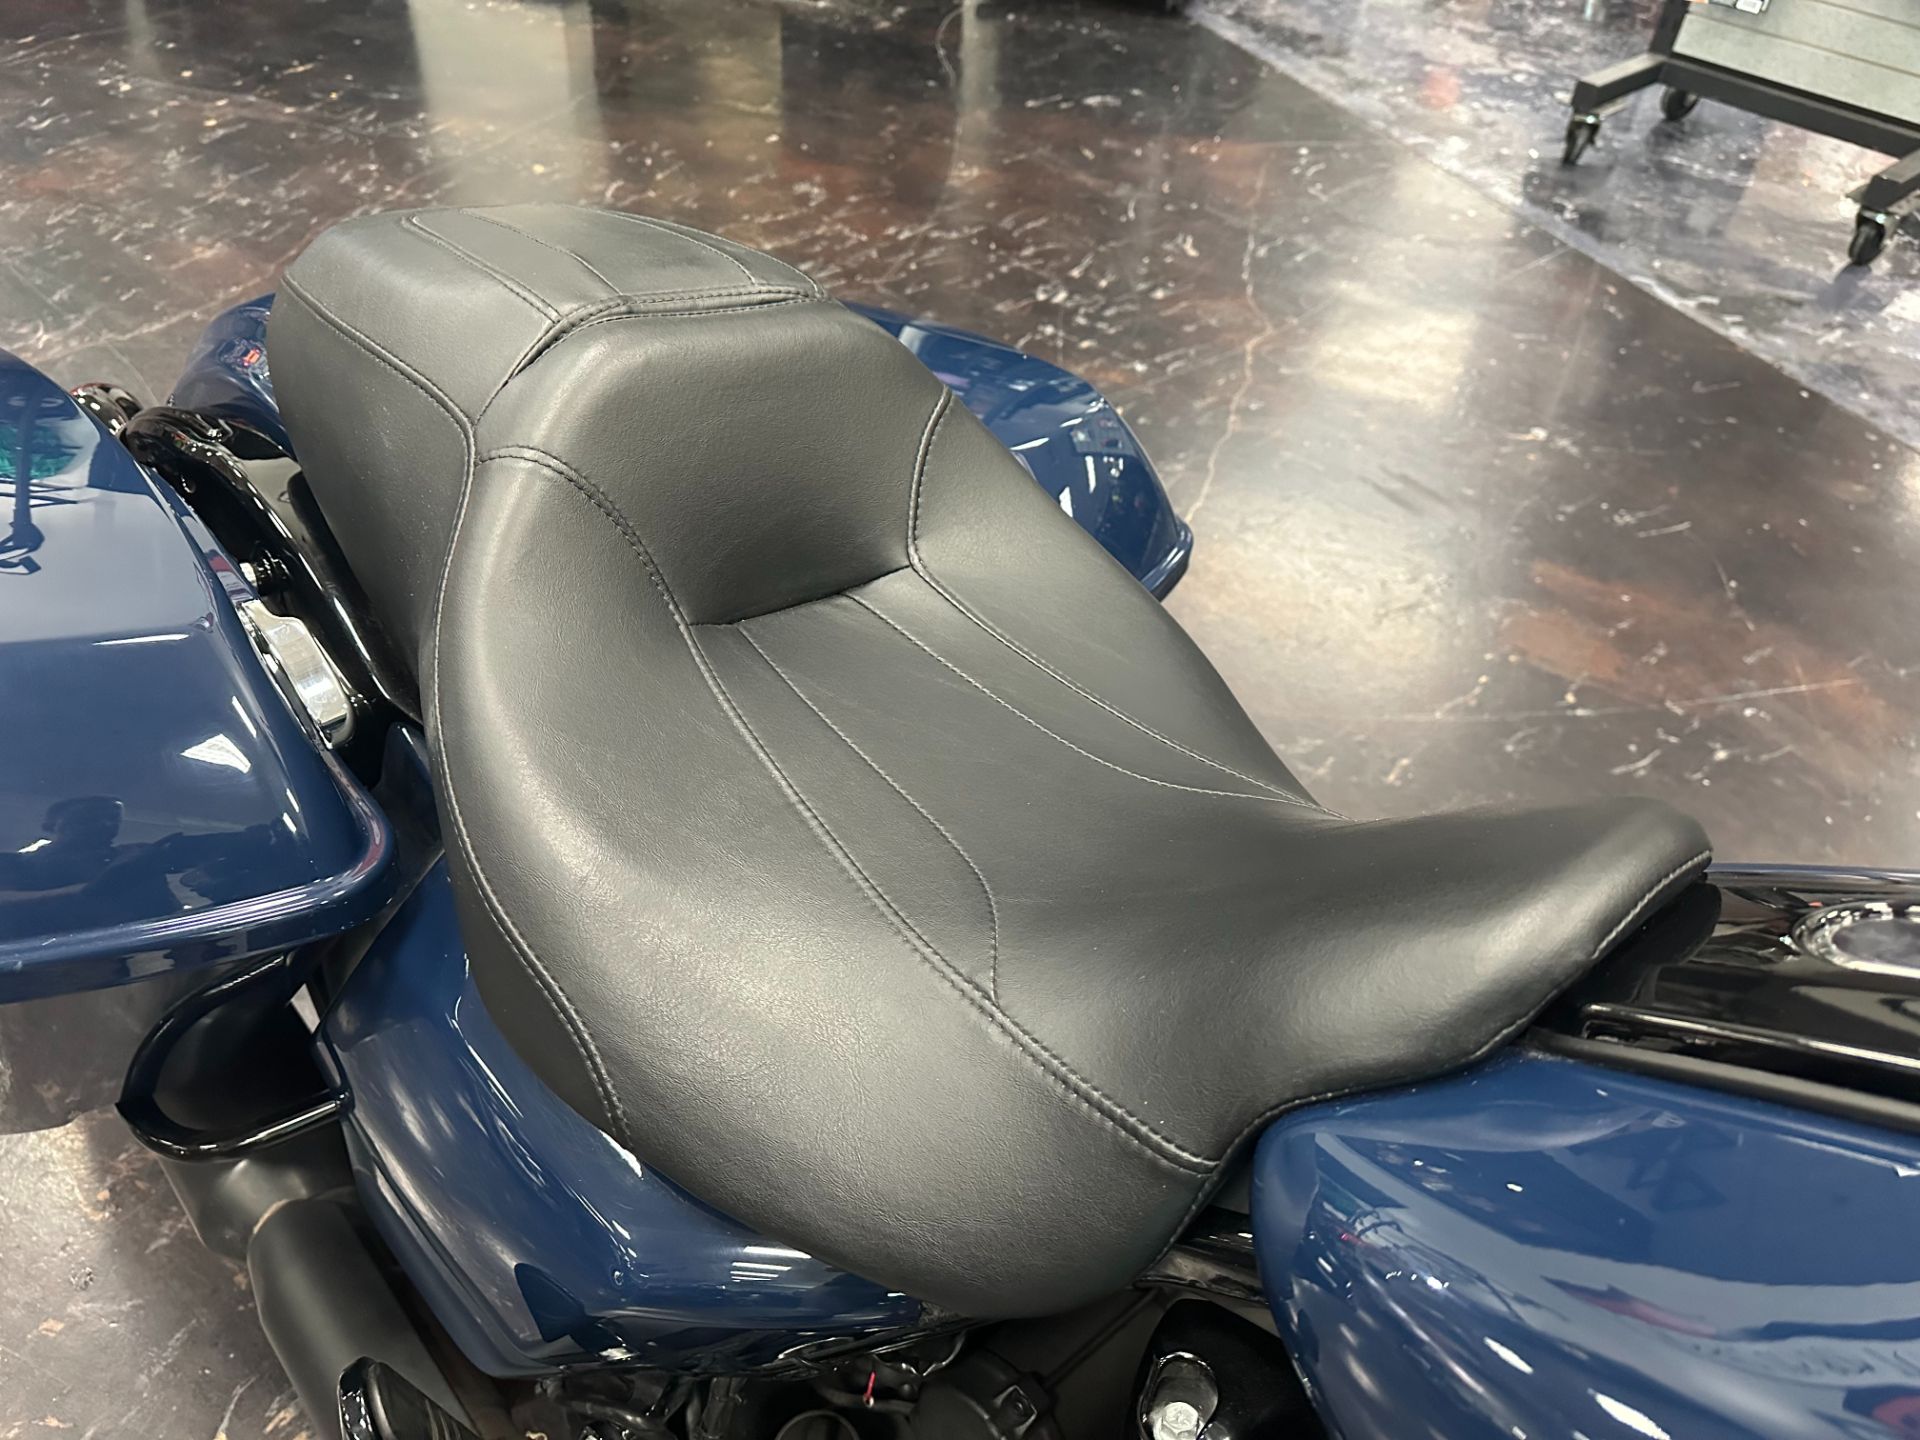 2019 Harley-Davidson Street Glide® Special in Metairie, Louisiana - Photo 7